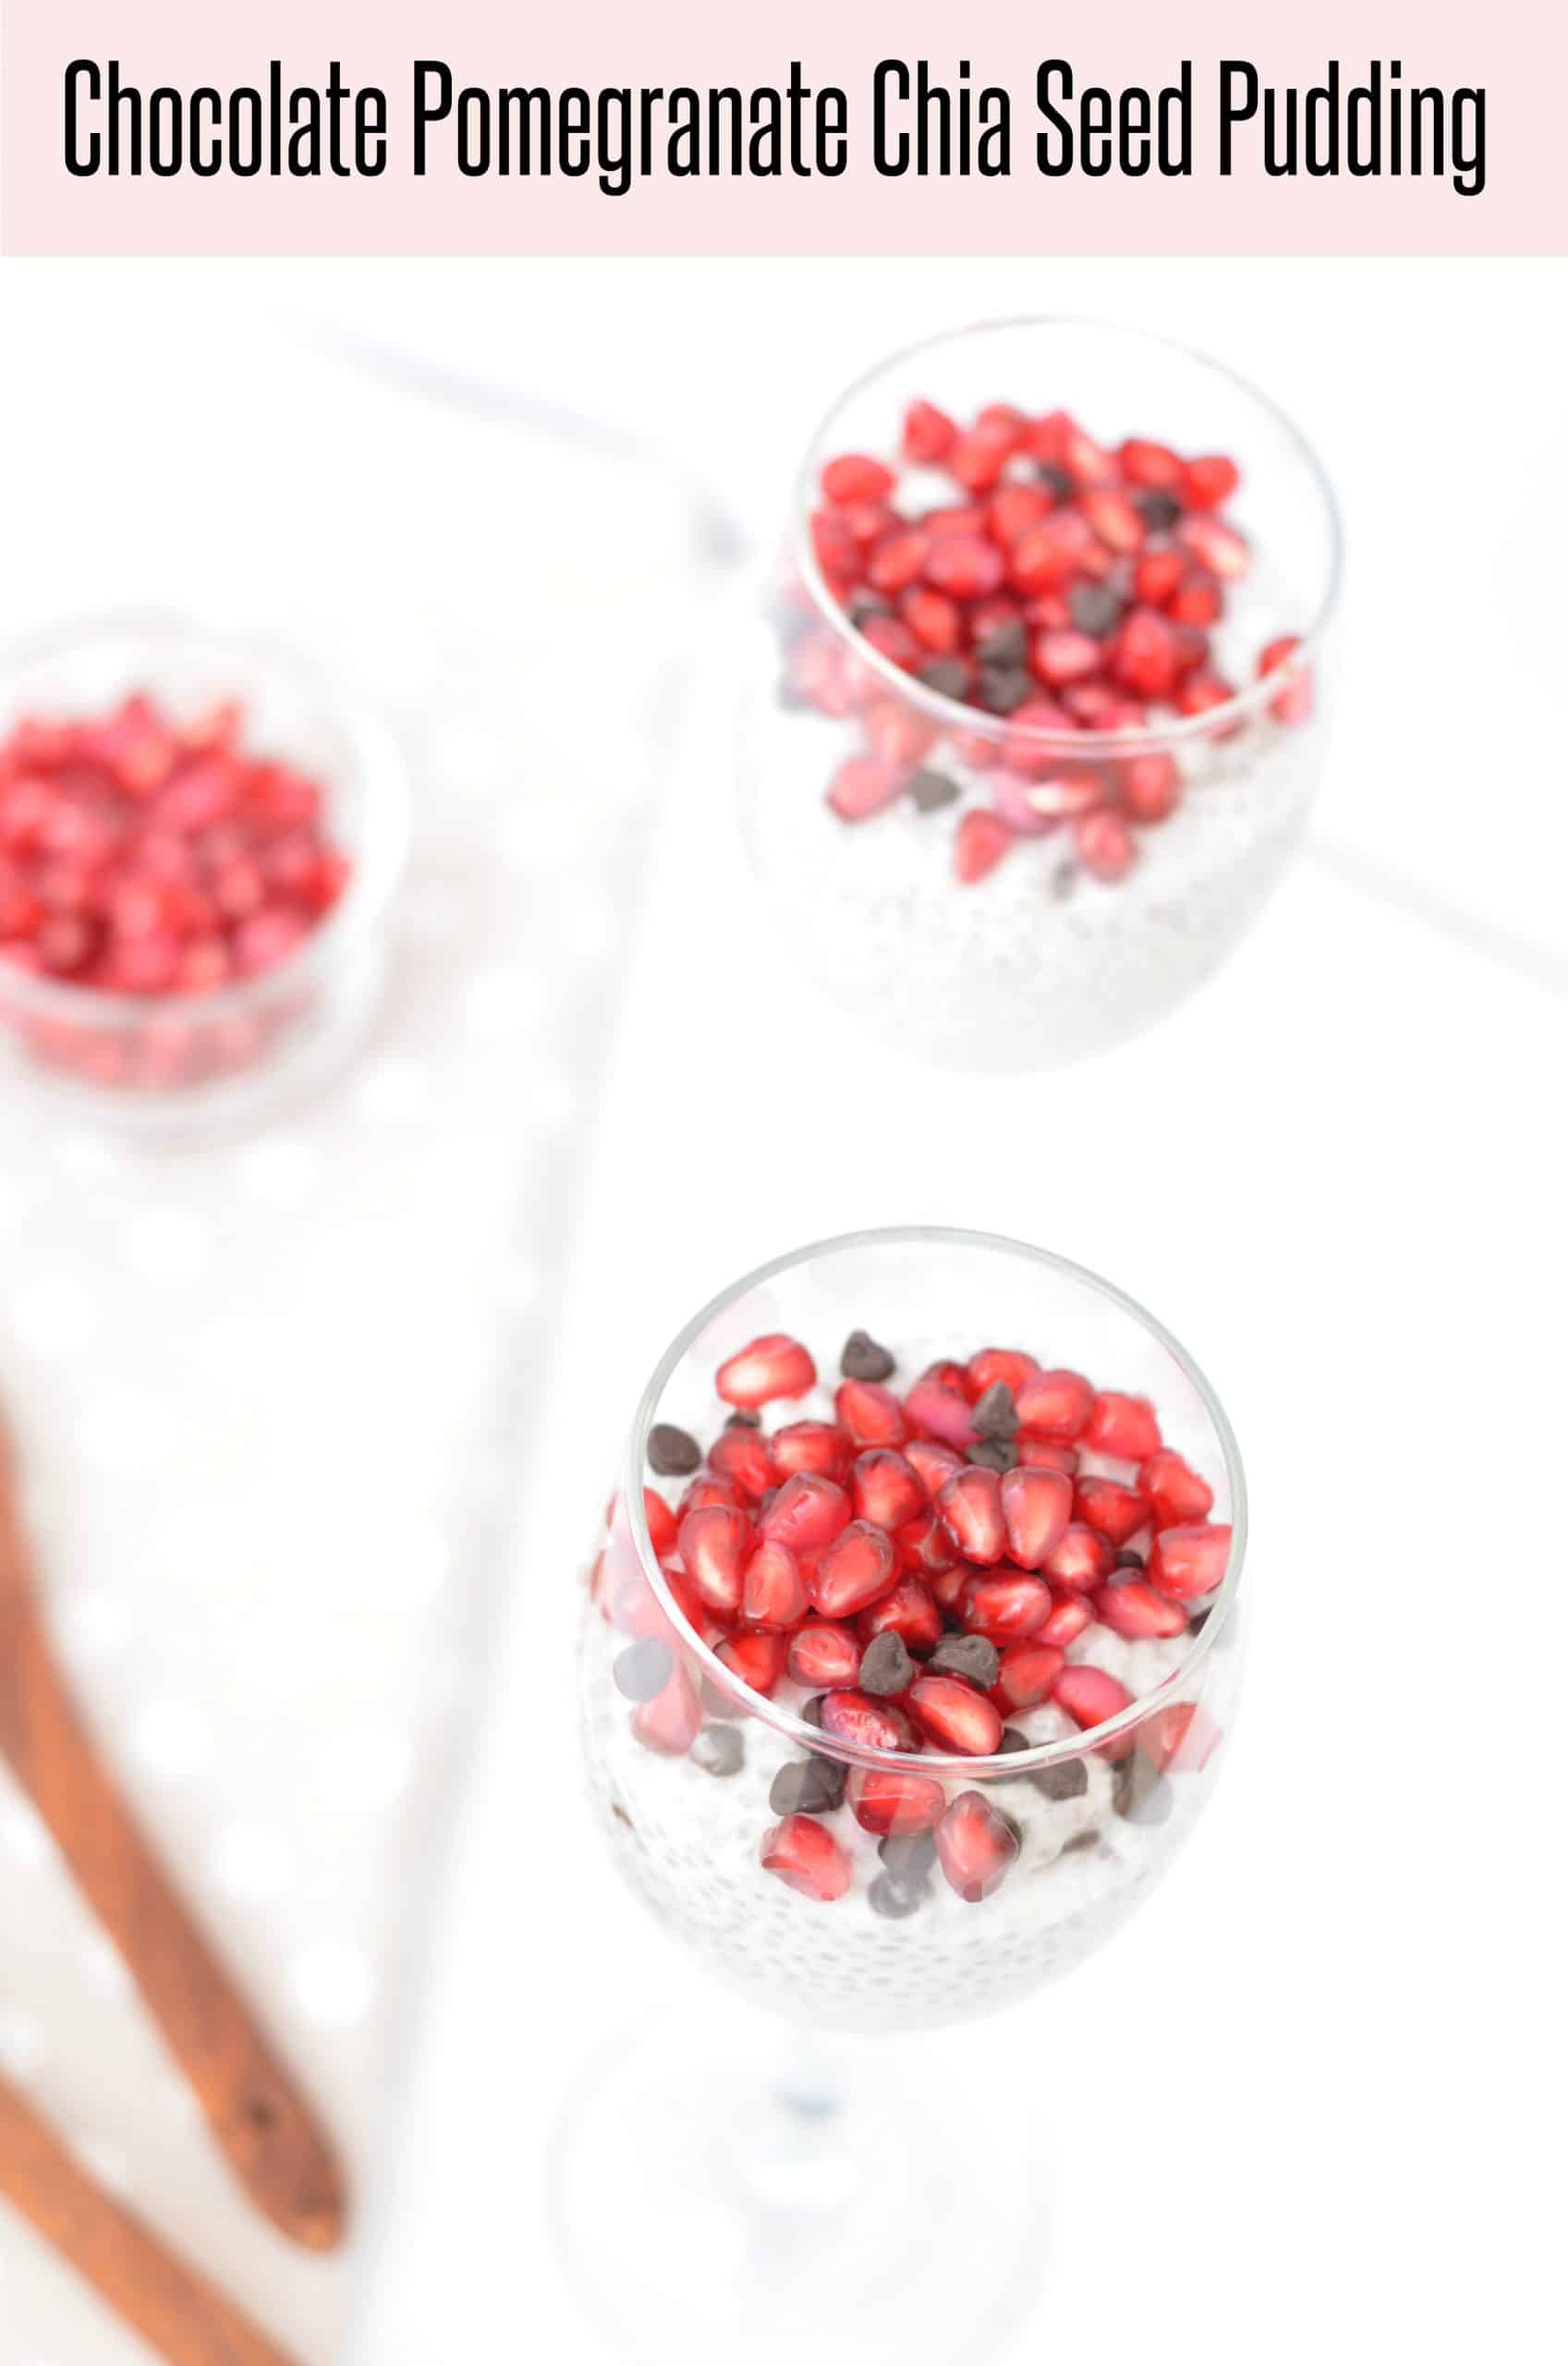 Chocolate Pomegranate Chia Seed Pudding With Coconut Milk